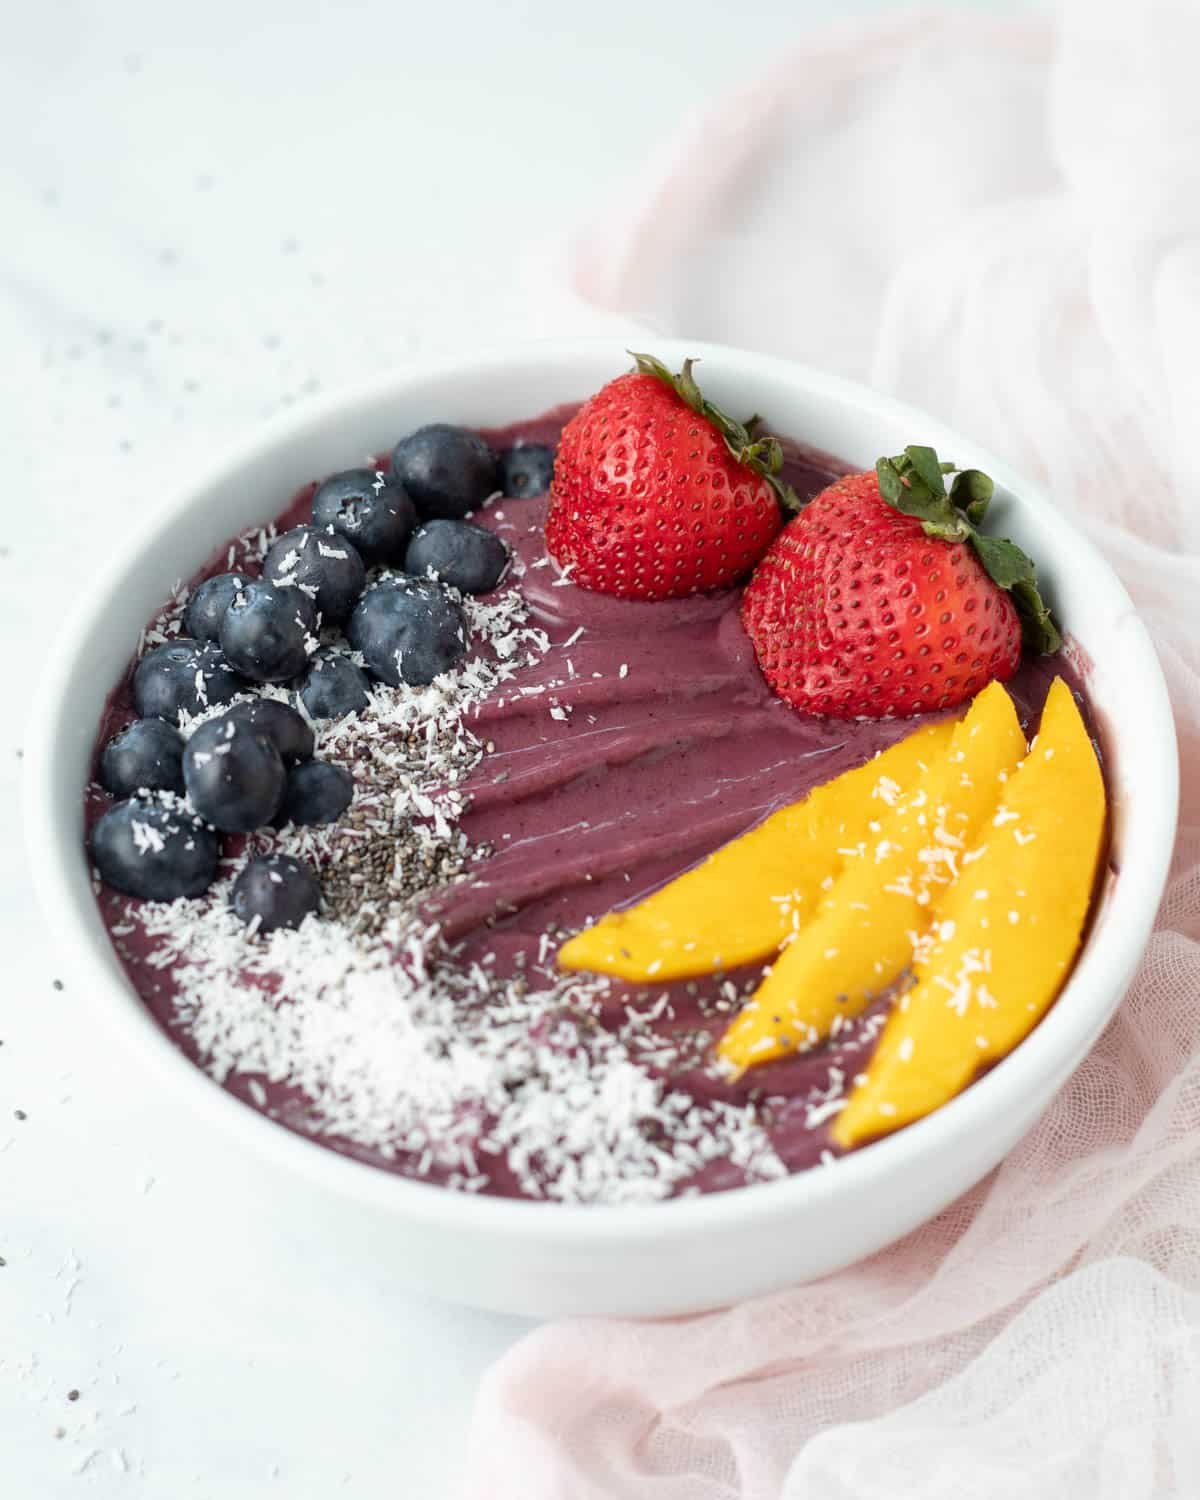 Acai bowl topped with fresh fruit, coconut flakes, and chia seeds.
